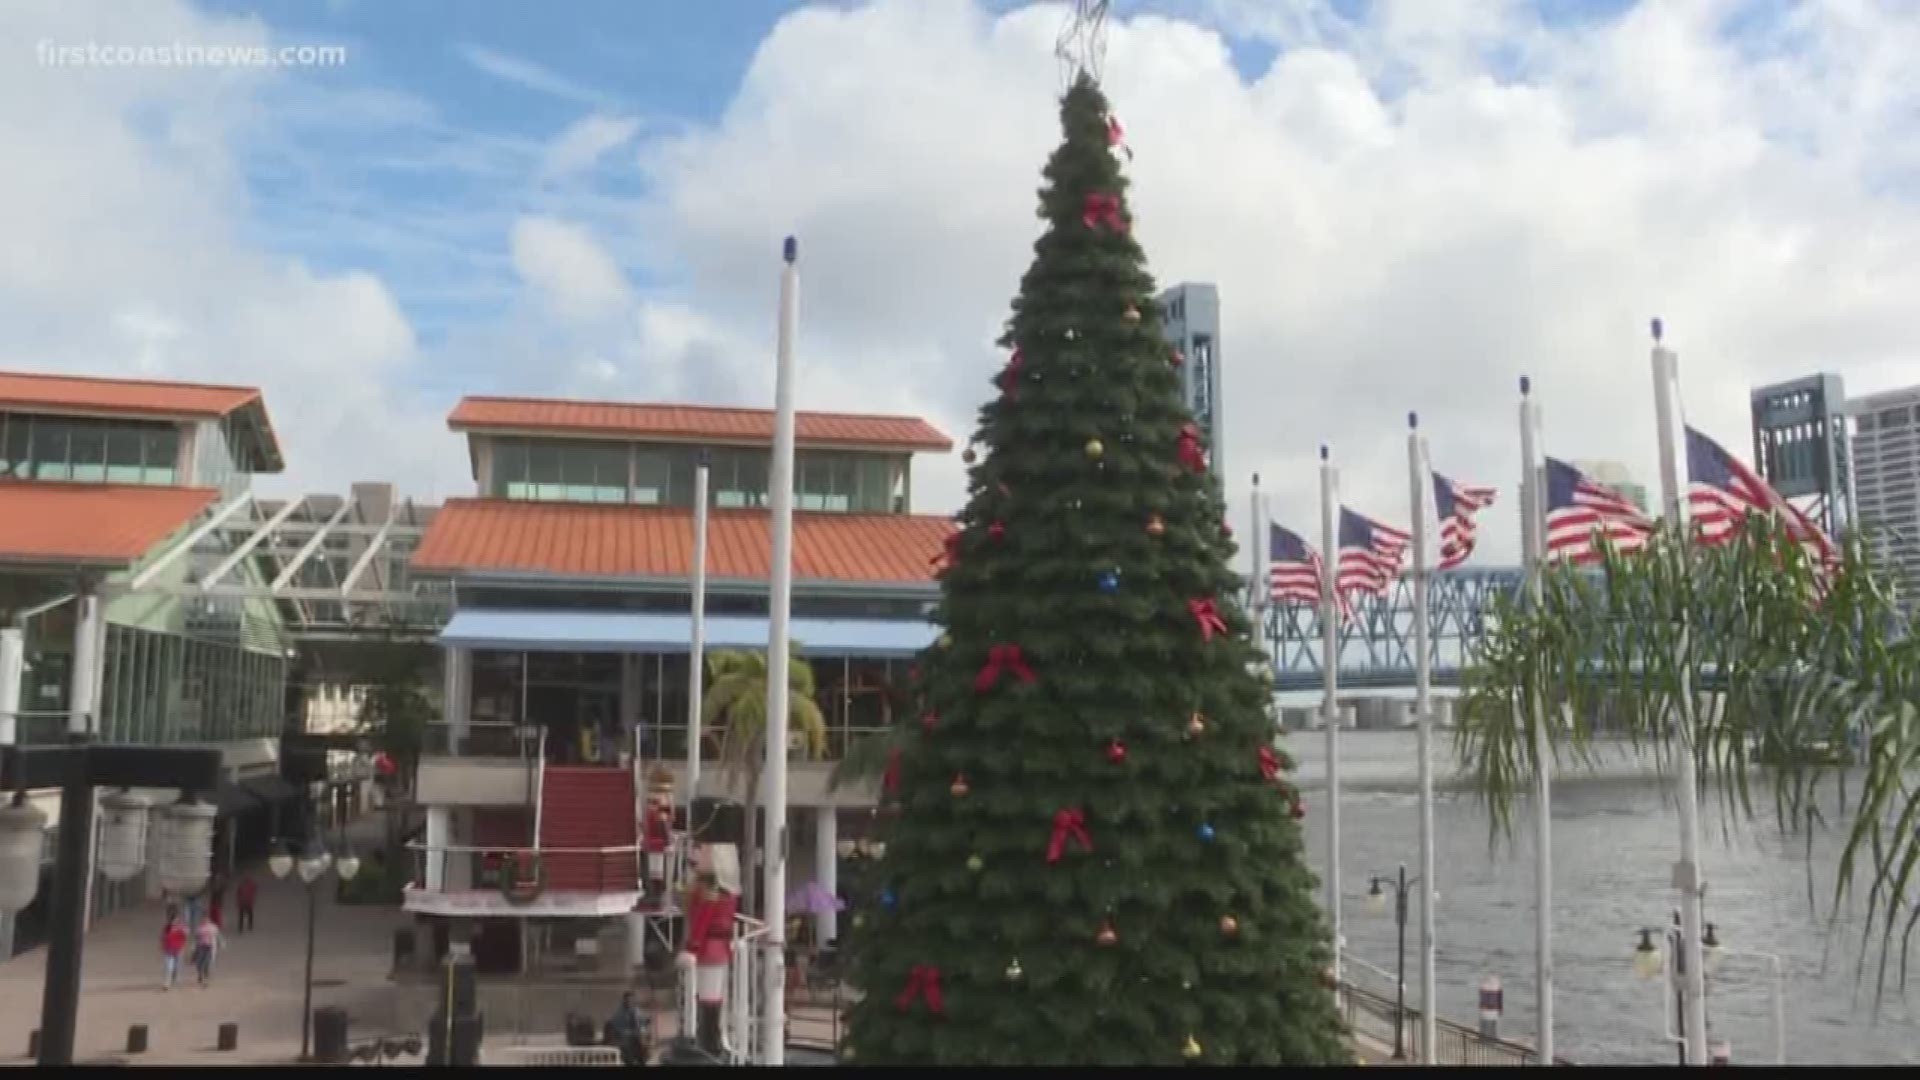 Final preparations are underway for the Jacksonville Landing's 32nd annual Christmas tree lighting ceremony this evening. The ceremony is scheduled to begin at 7 p.m. in Downtown Jacksonville at the Landing.